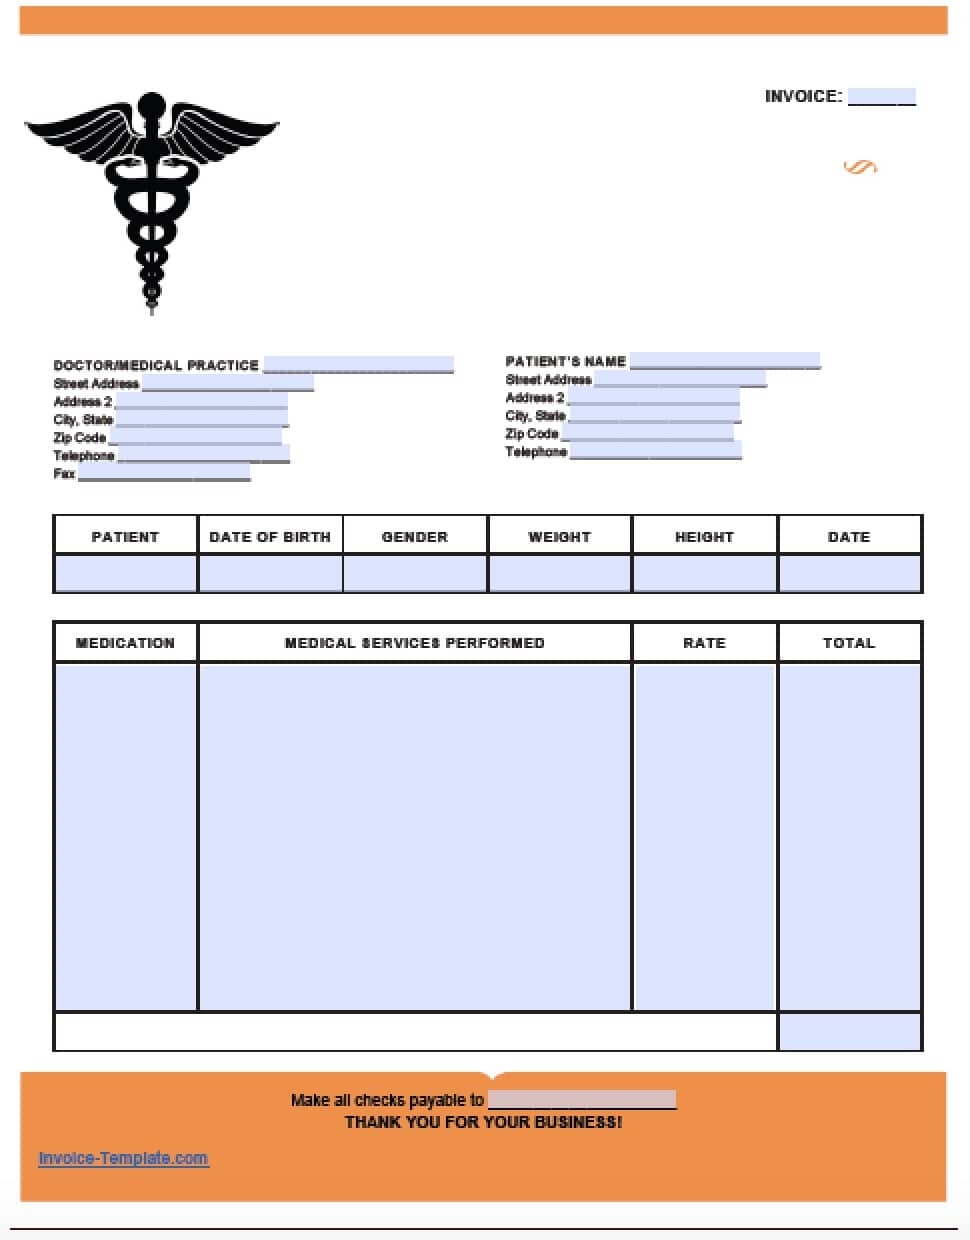 free medical invoice template excel pdf word doc medical invoice template word